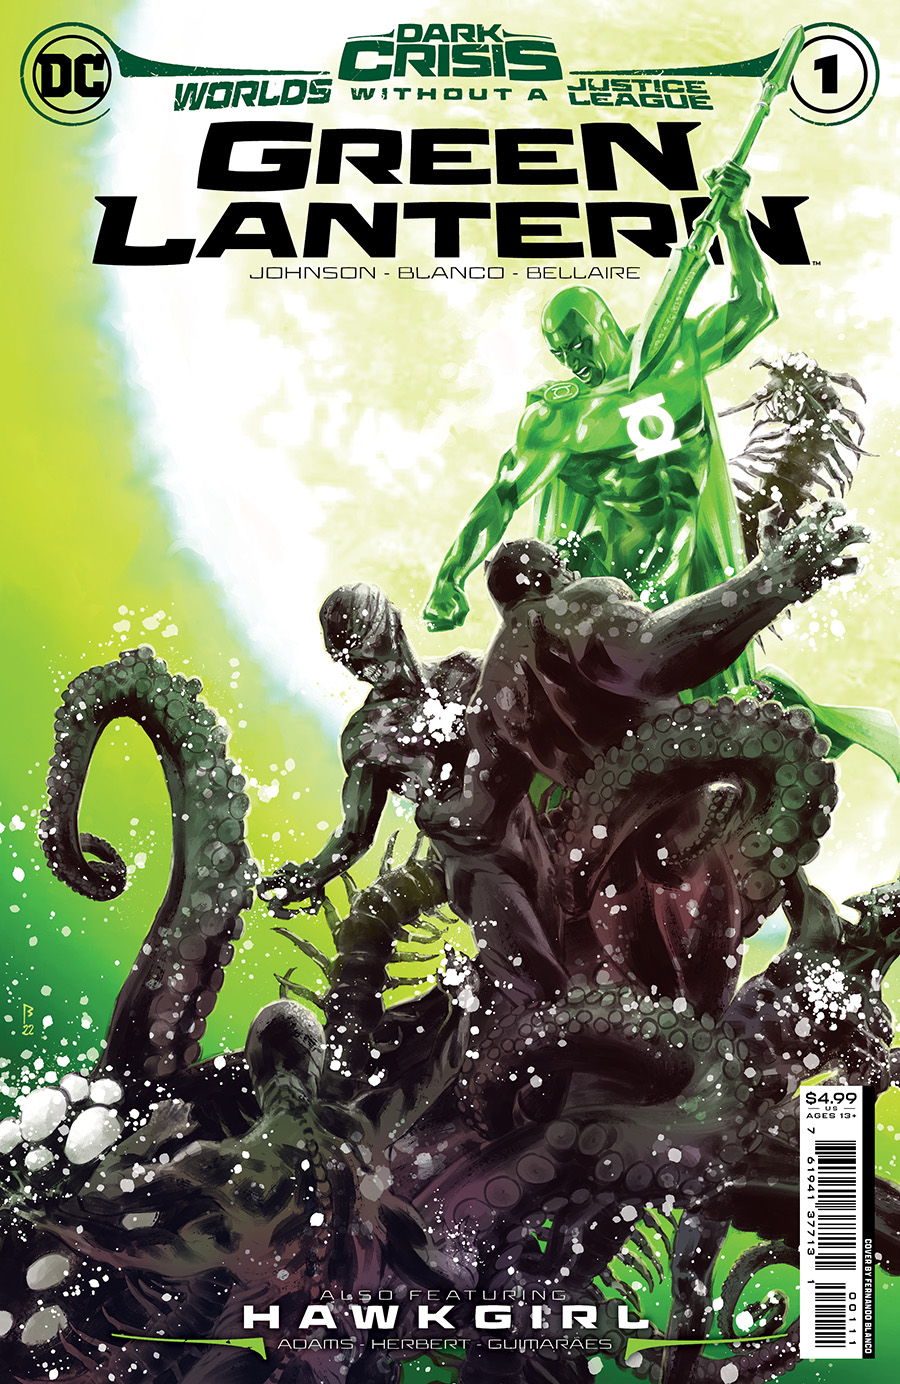 Dark Crisis Worlds Without A Justice League Green Lantern #1 (One Shot) Cover A Regular Fernando Blanco Cover